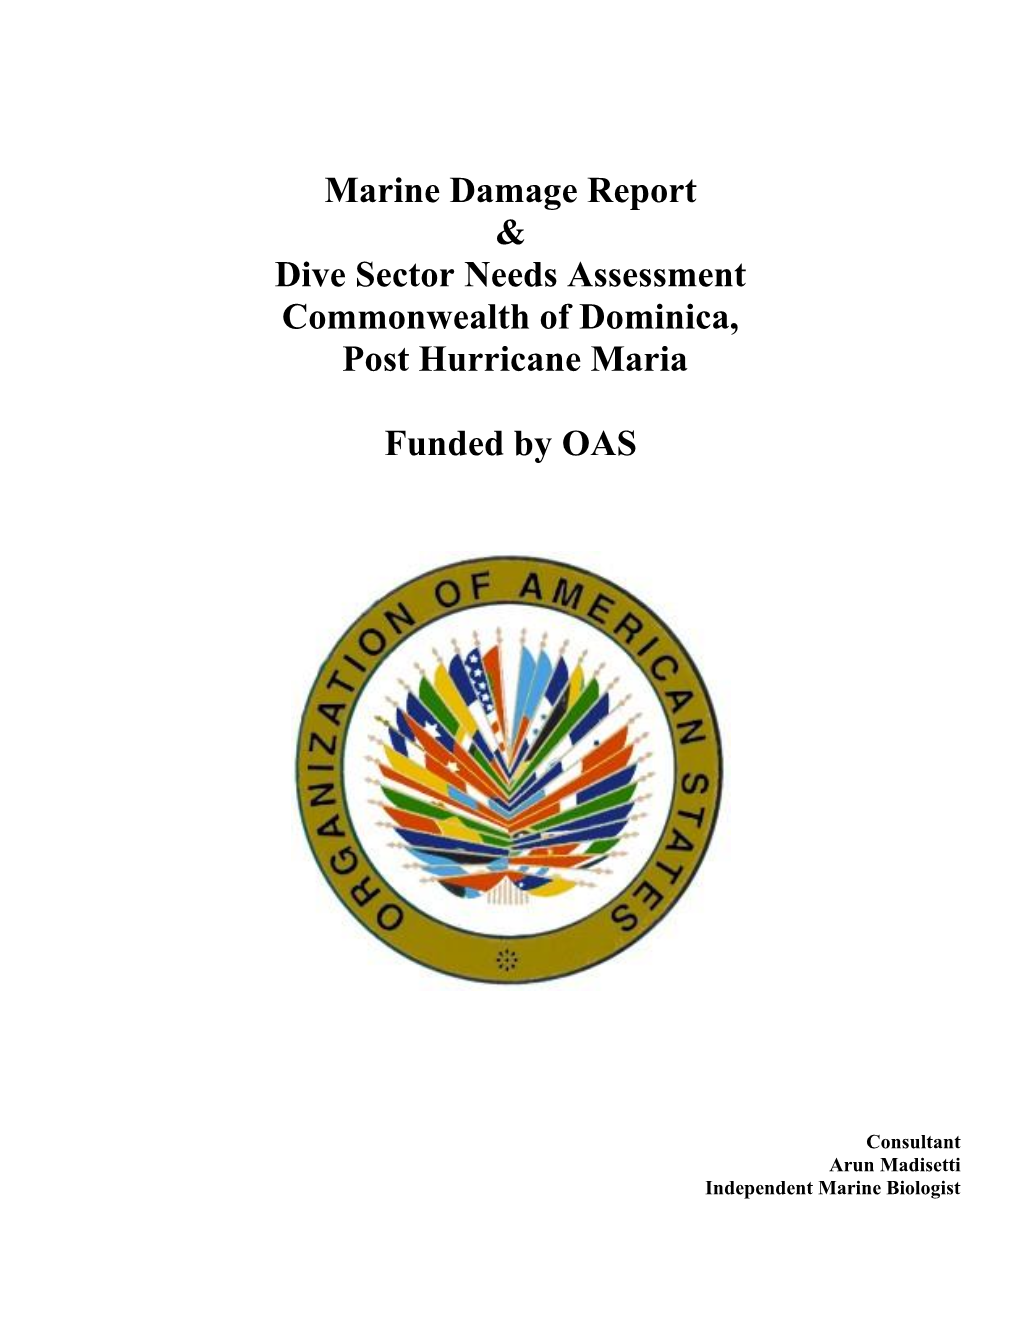 Marine Damage Report & Dive Sector Needs Assessment Commonwealth of Dominica, Post Hurricane Maria Funded By